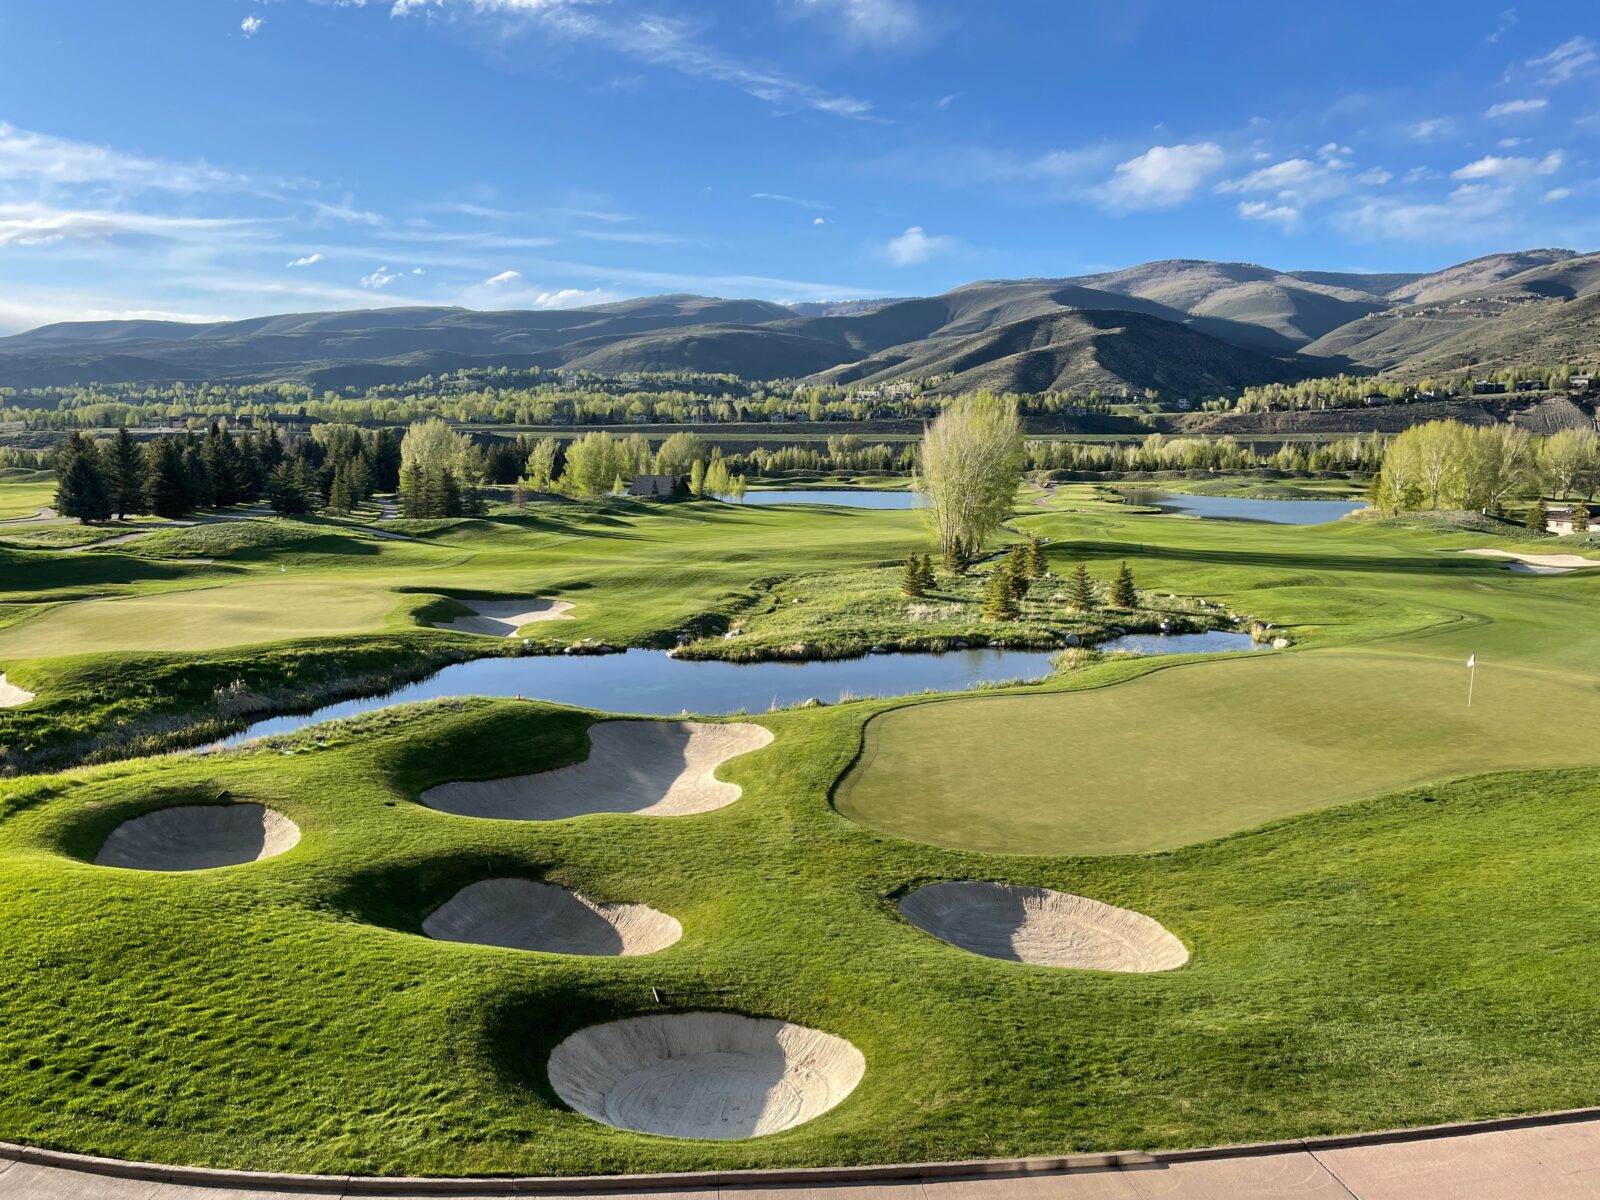 Green grass at a golf course near green trees and mountains under blue sky during daytime